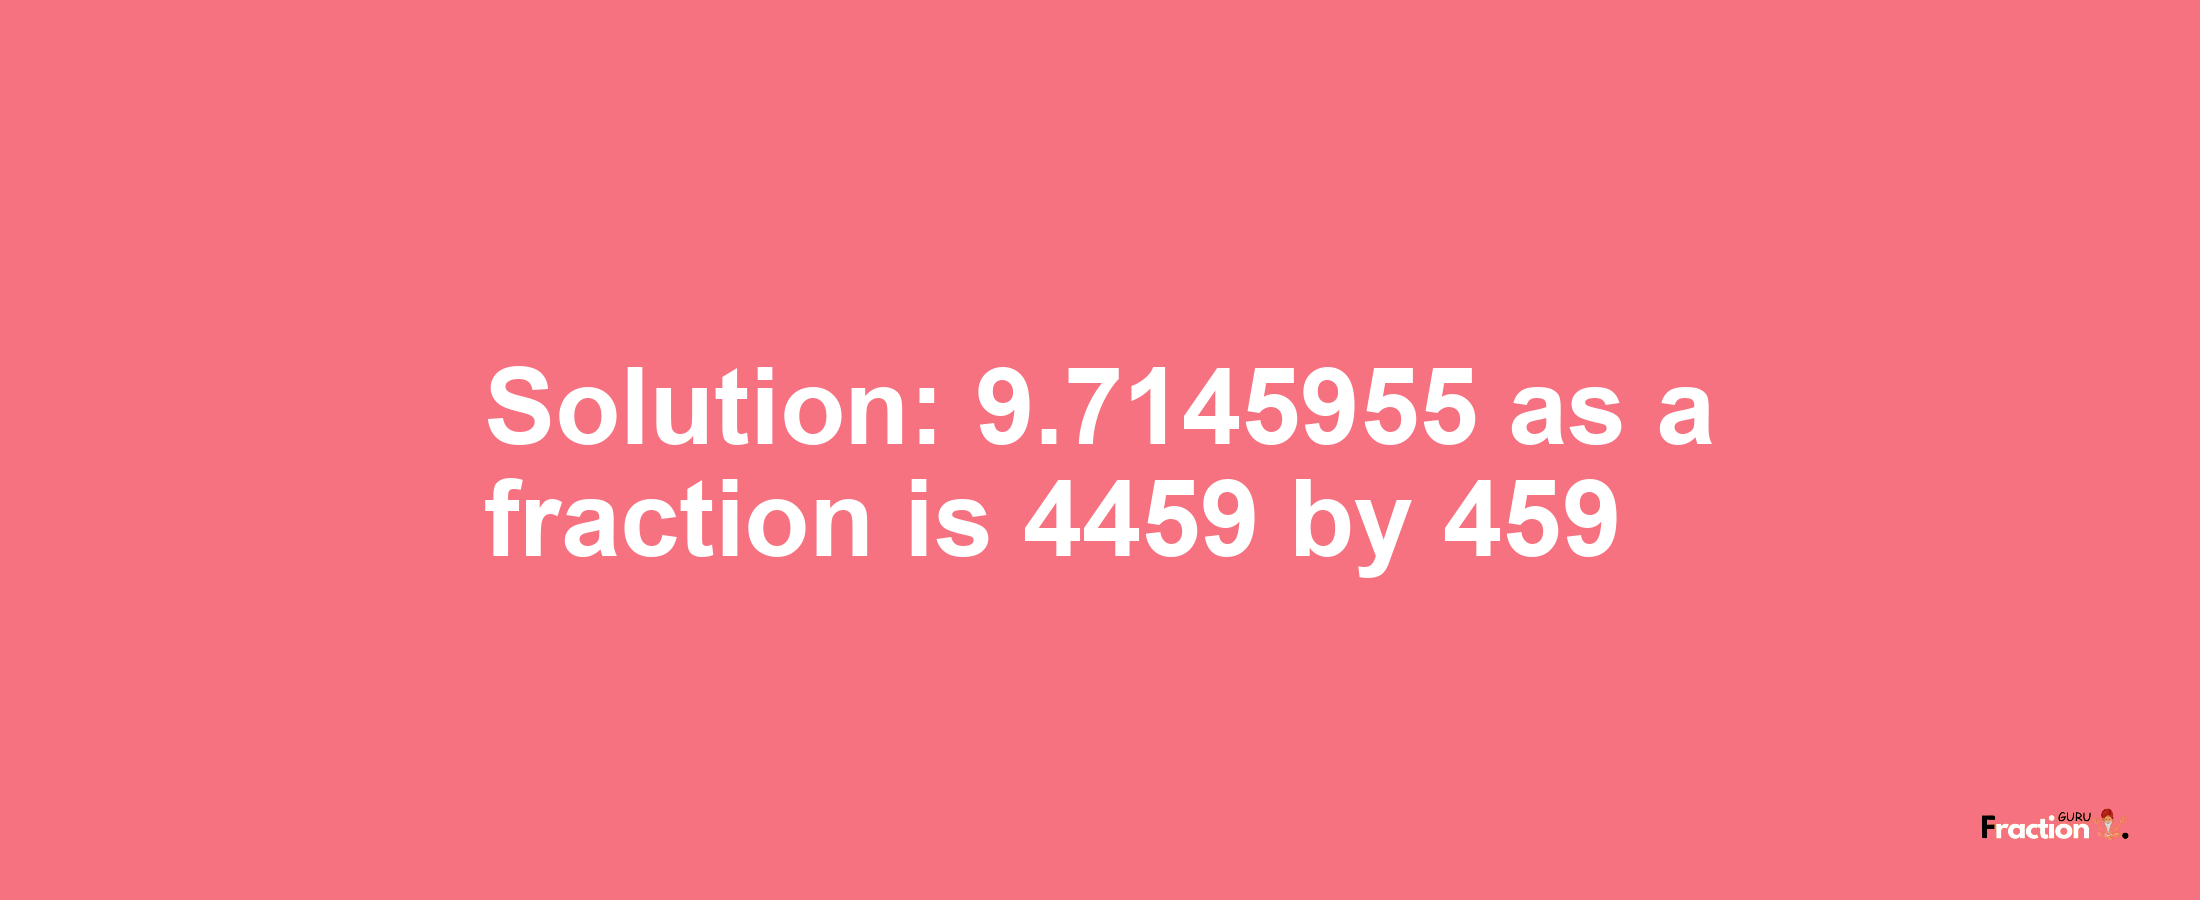 Solution:9.7145955 as a fraction is 4459/459